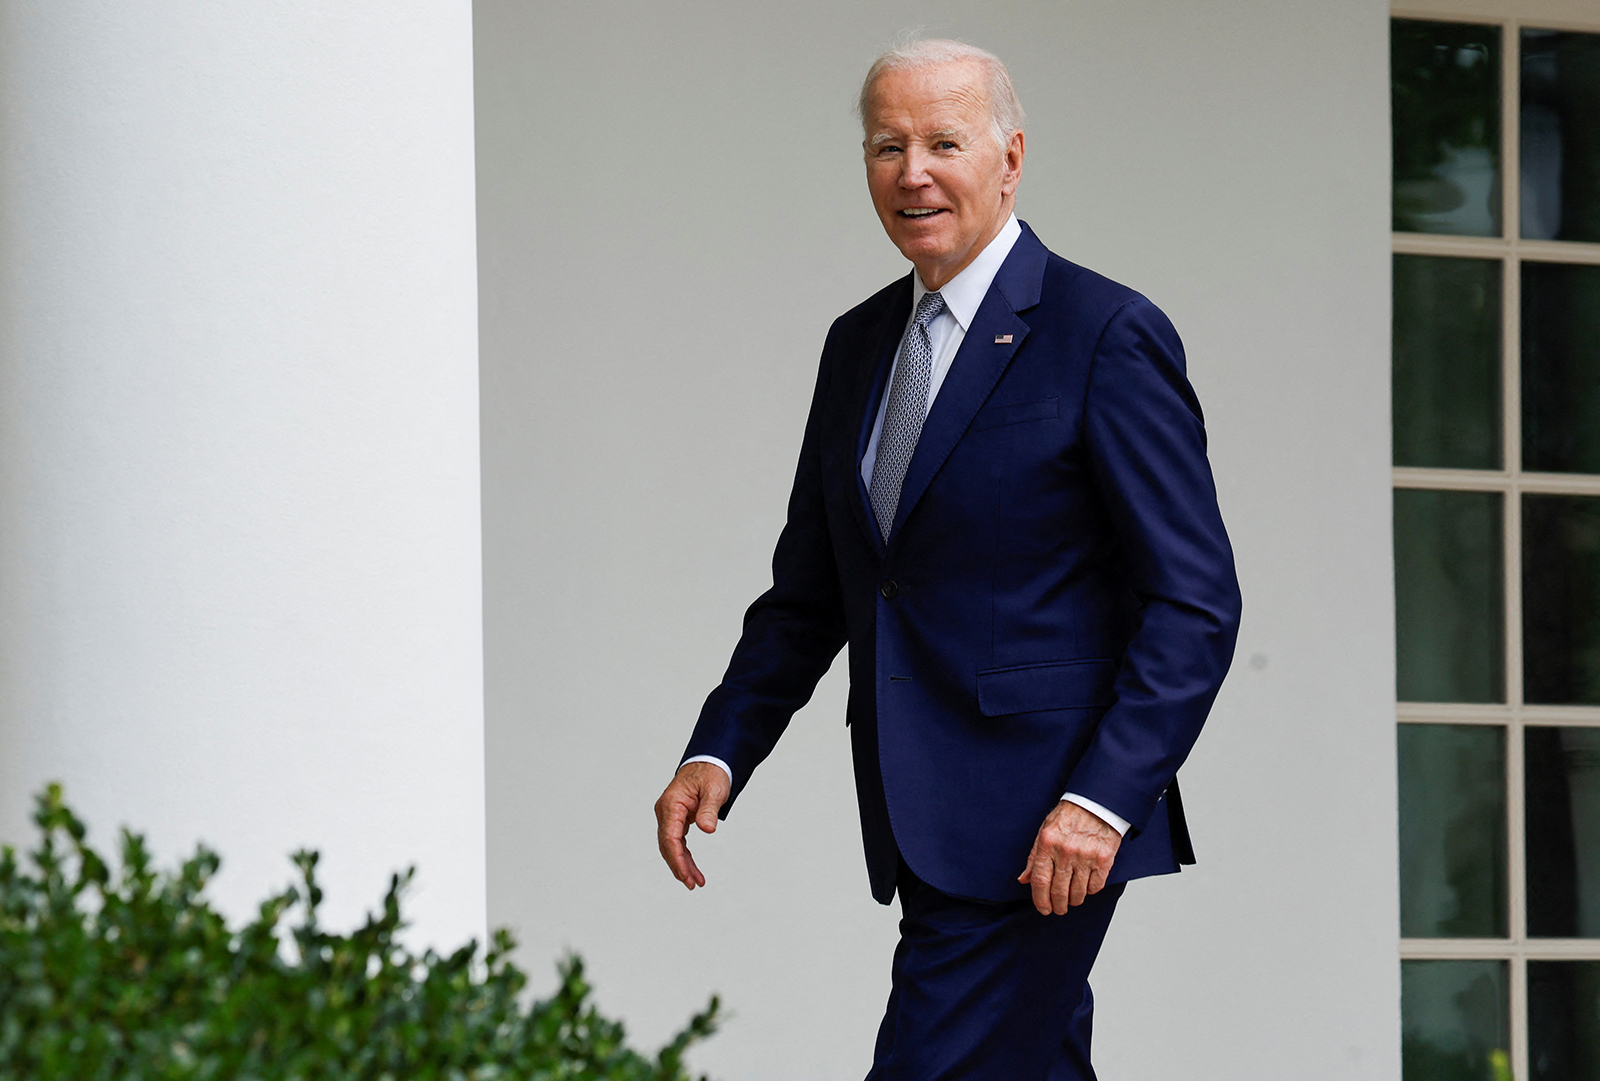 U.S. President Joe Biden smiles as he responds to a reporter's question about whether he will visit striking auto workers on the UAW picket line, as he walks back to the Oval Office after an event announcing the creation of a new White House Office of Gun Violence Prevention, in the Rose Garden of the White House in Washington today.